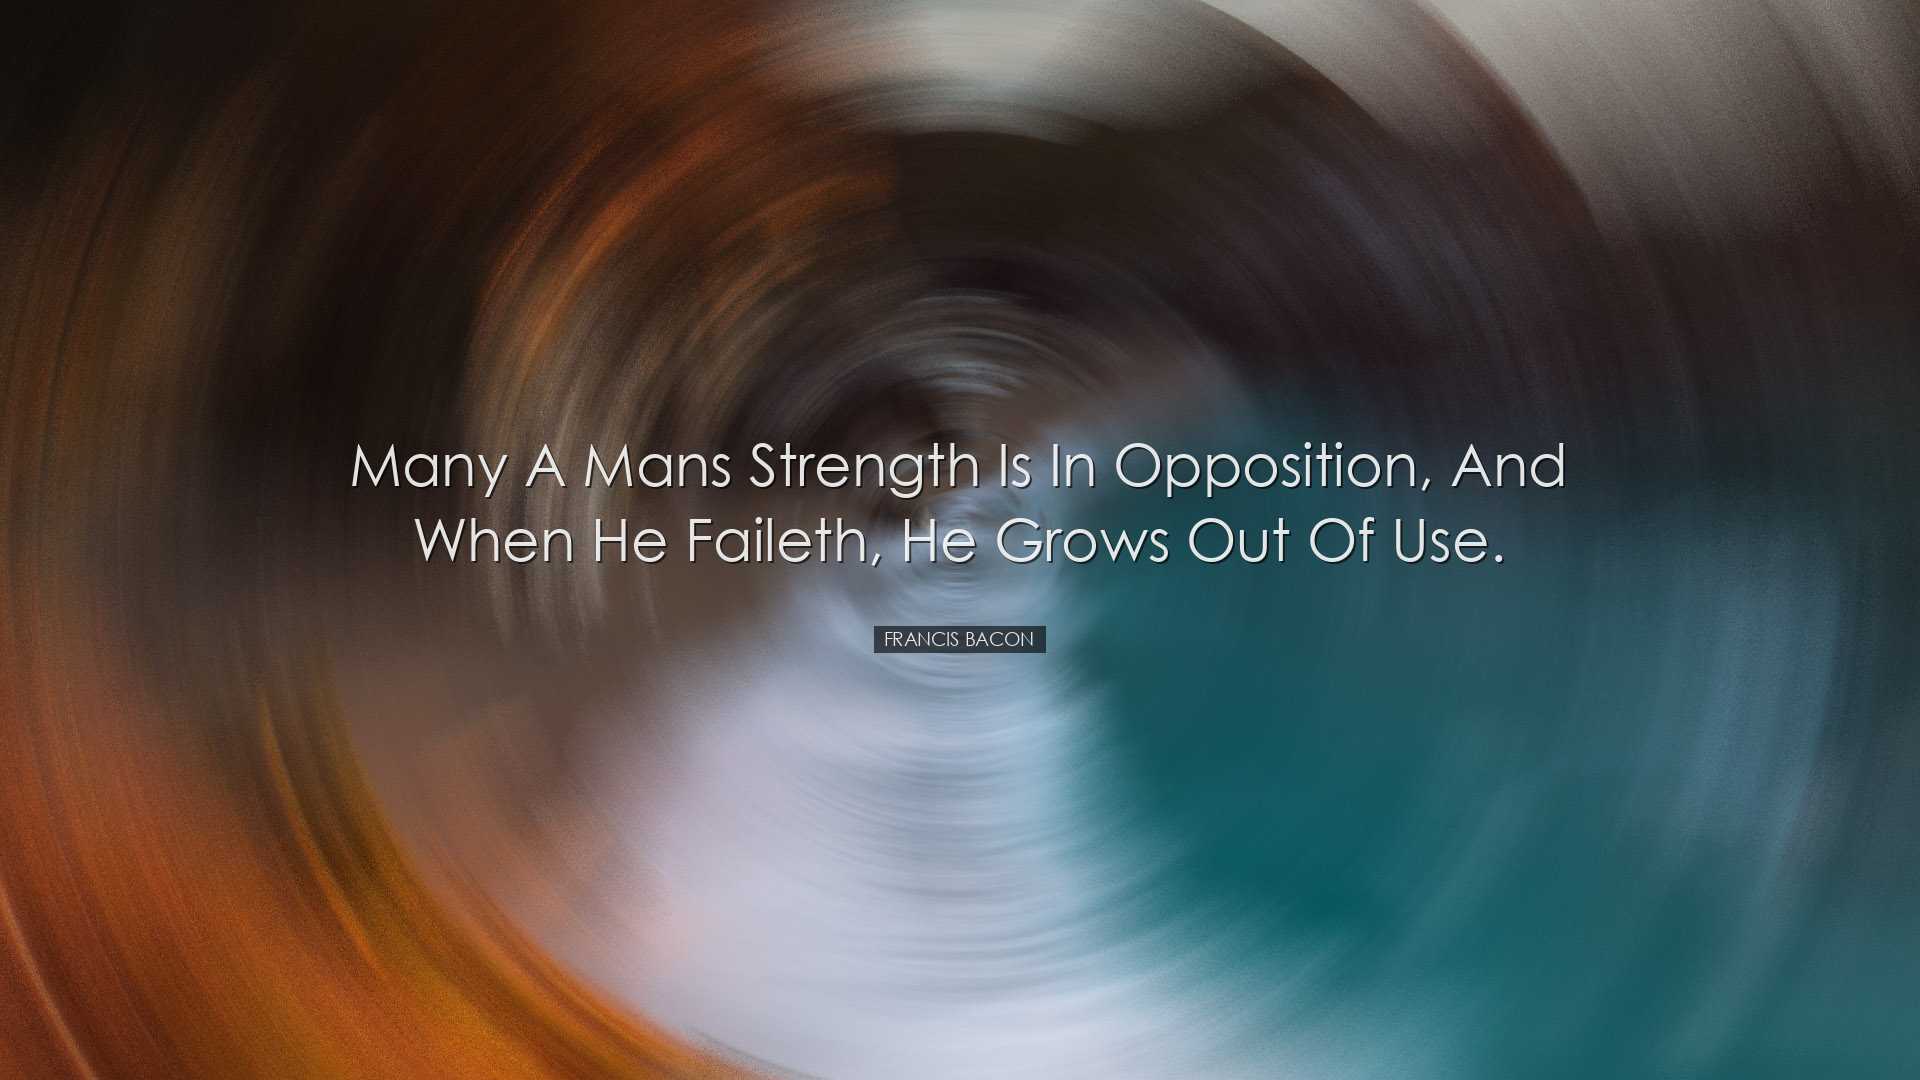 Many a mans strength is in opposition, and when he faileth, he gro